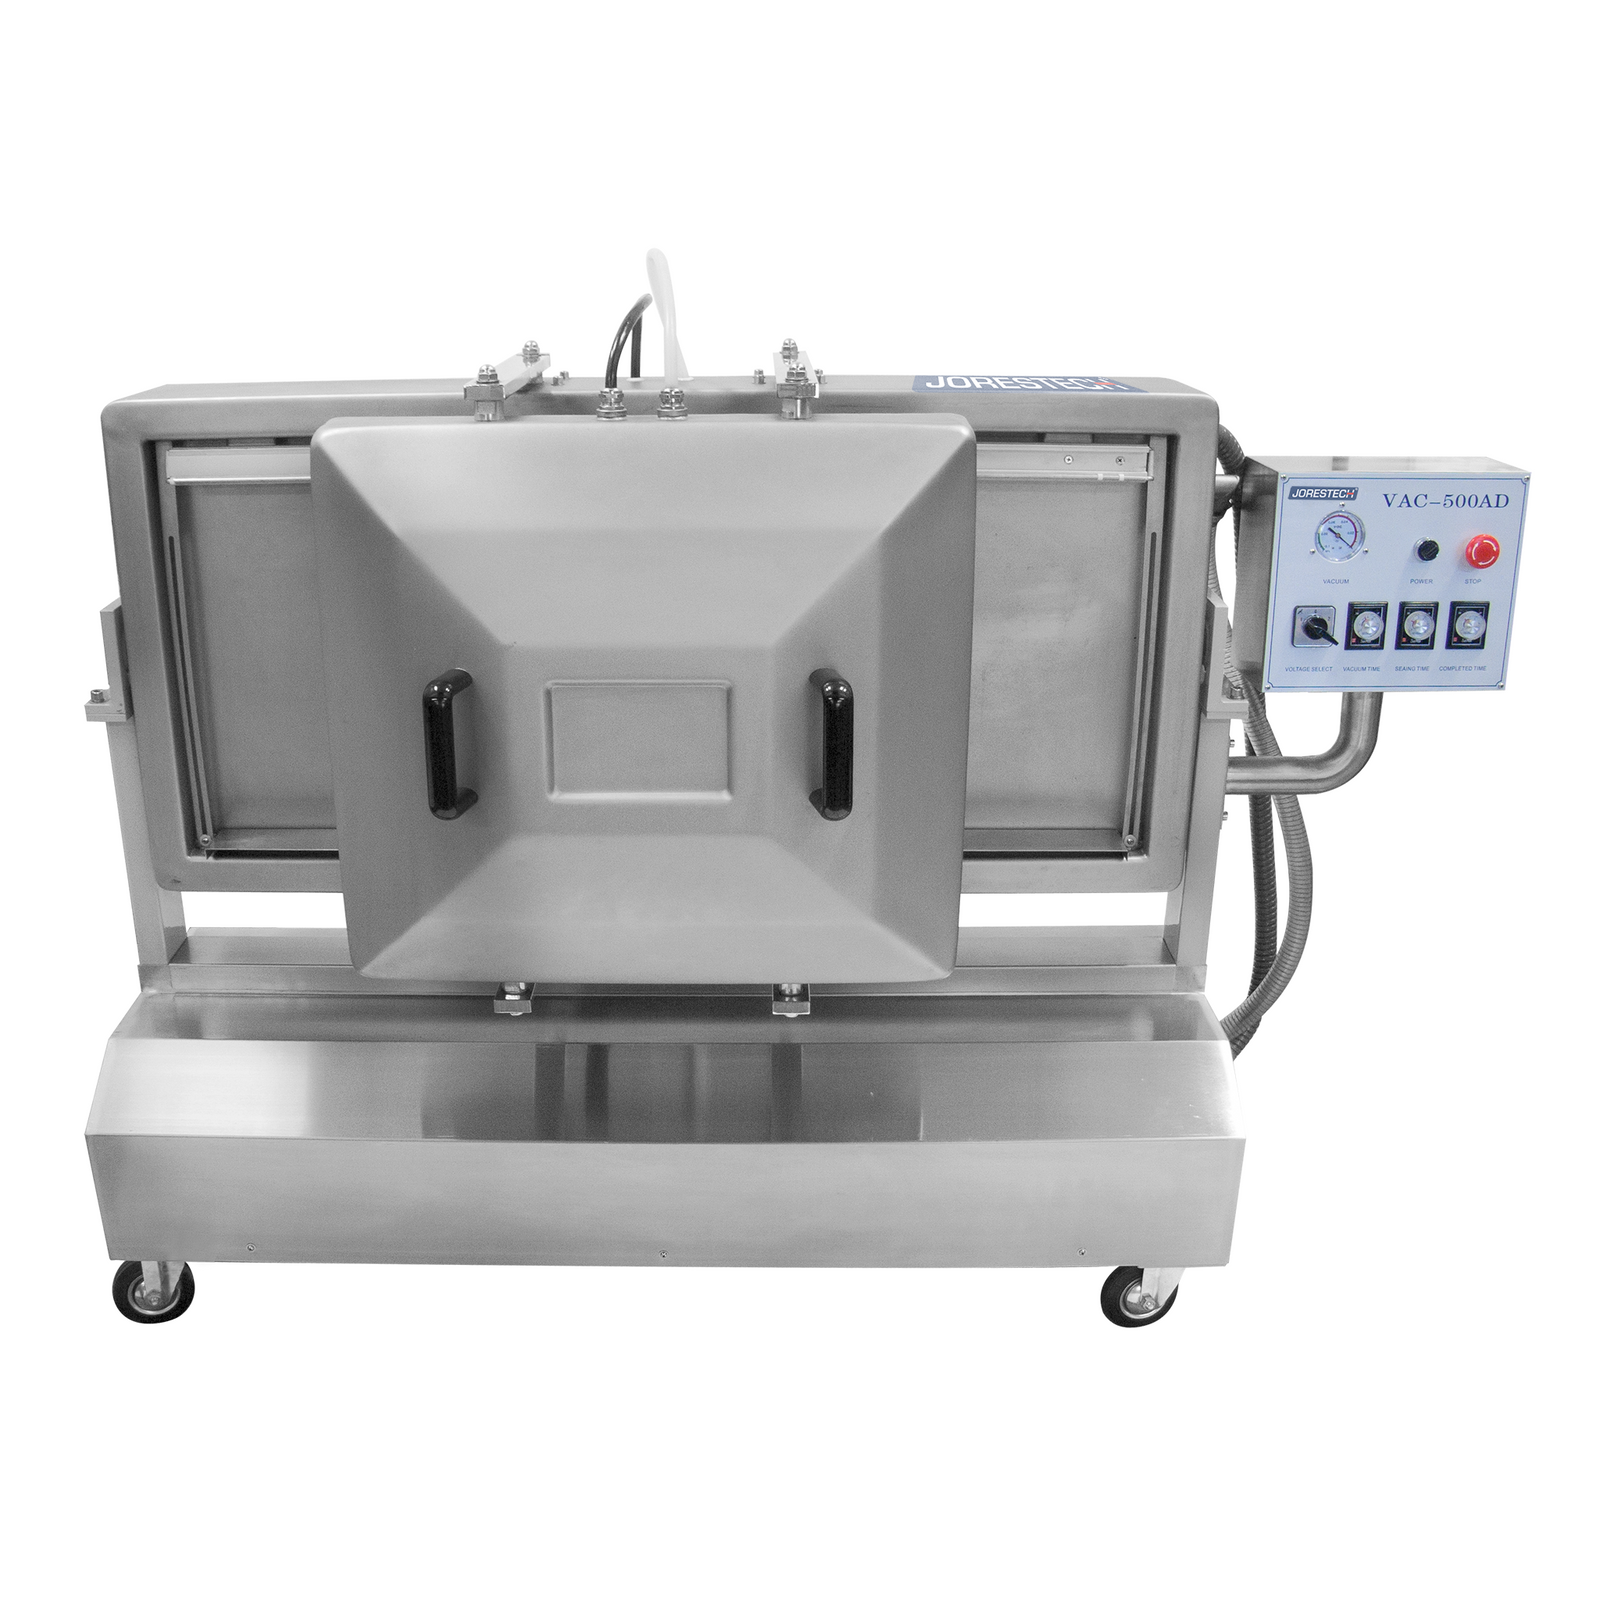 Front of the JORESTECH two reclinable chamber vacuum sealer. The chamber and sealing structure of the machine are in a vertical position.